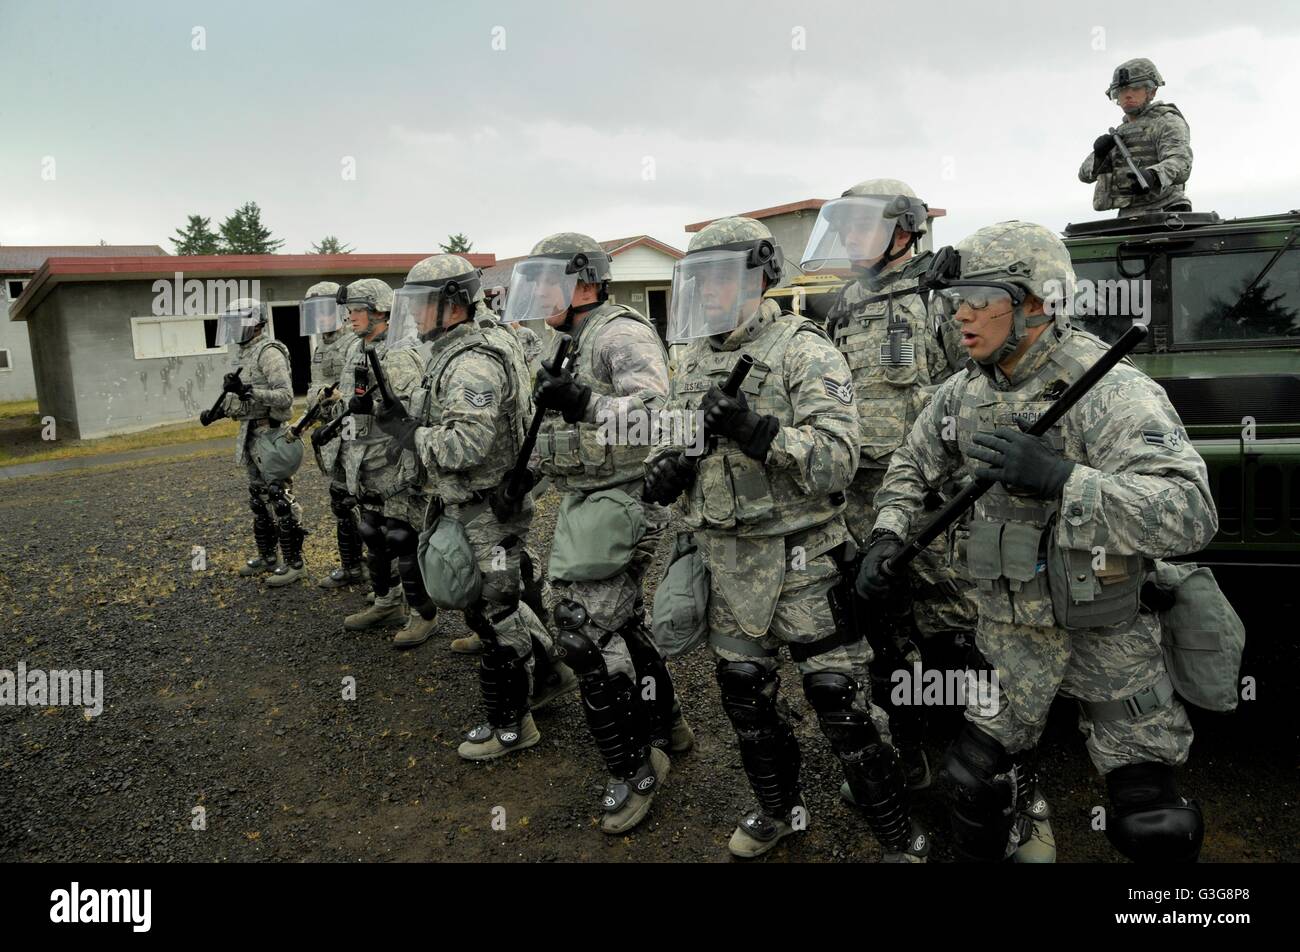 Oregon Air National Guard Security Force members train during riot control operations against simulated protestors at the Camp Rilea training village June 10, 2016 in Warrenton, Oregon. The training is part of exercise Cascadia Rising role playing scenario following a 9.0 magnitude earthquake. Stock Photo